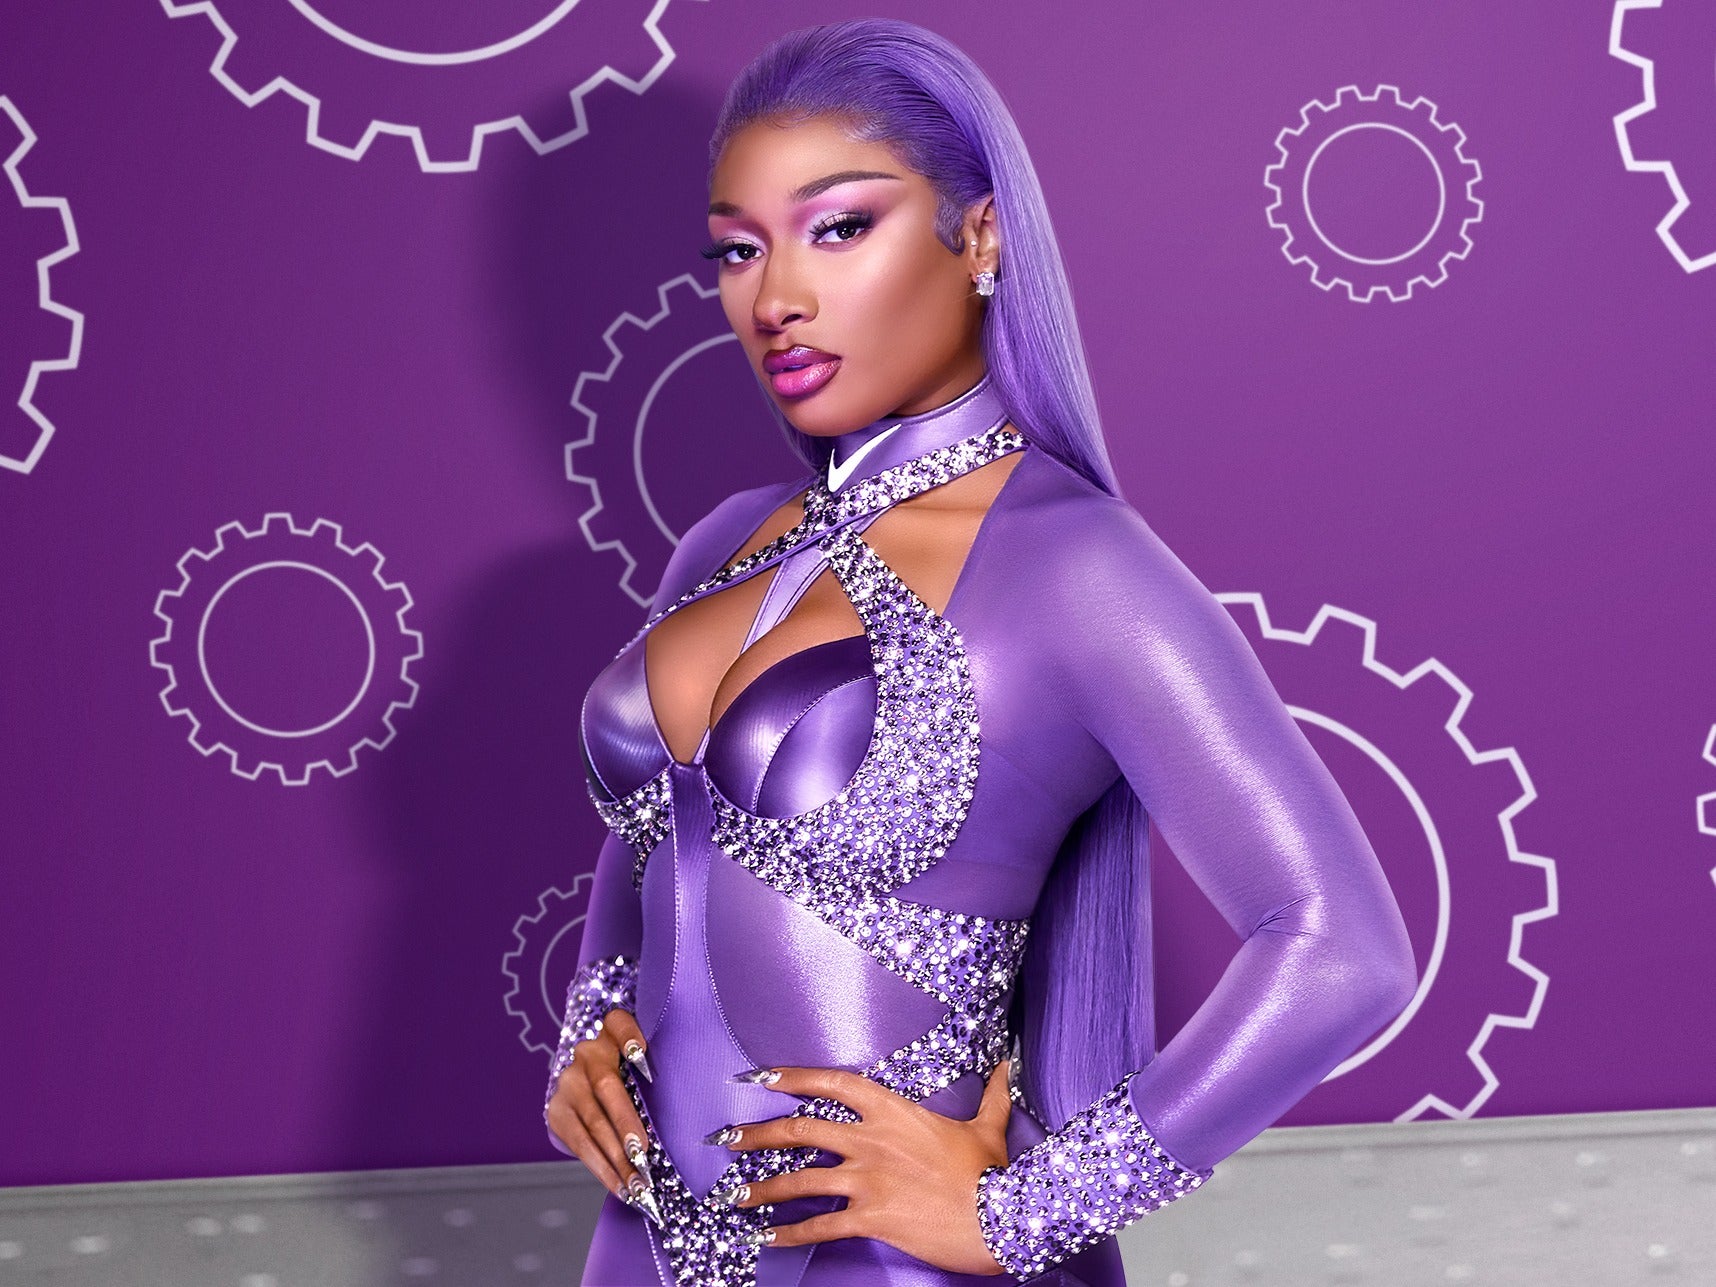 Megan Thee Stallion And Planet Fitness Announce New Partnership With A Merch Collection